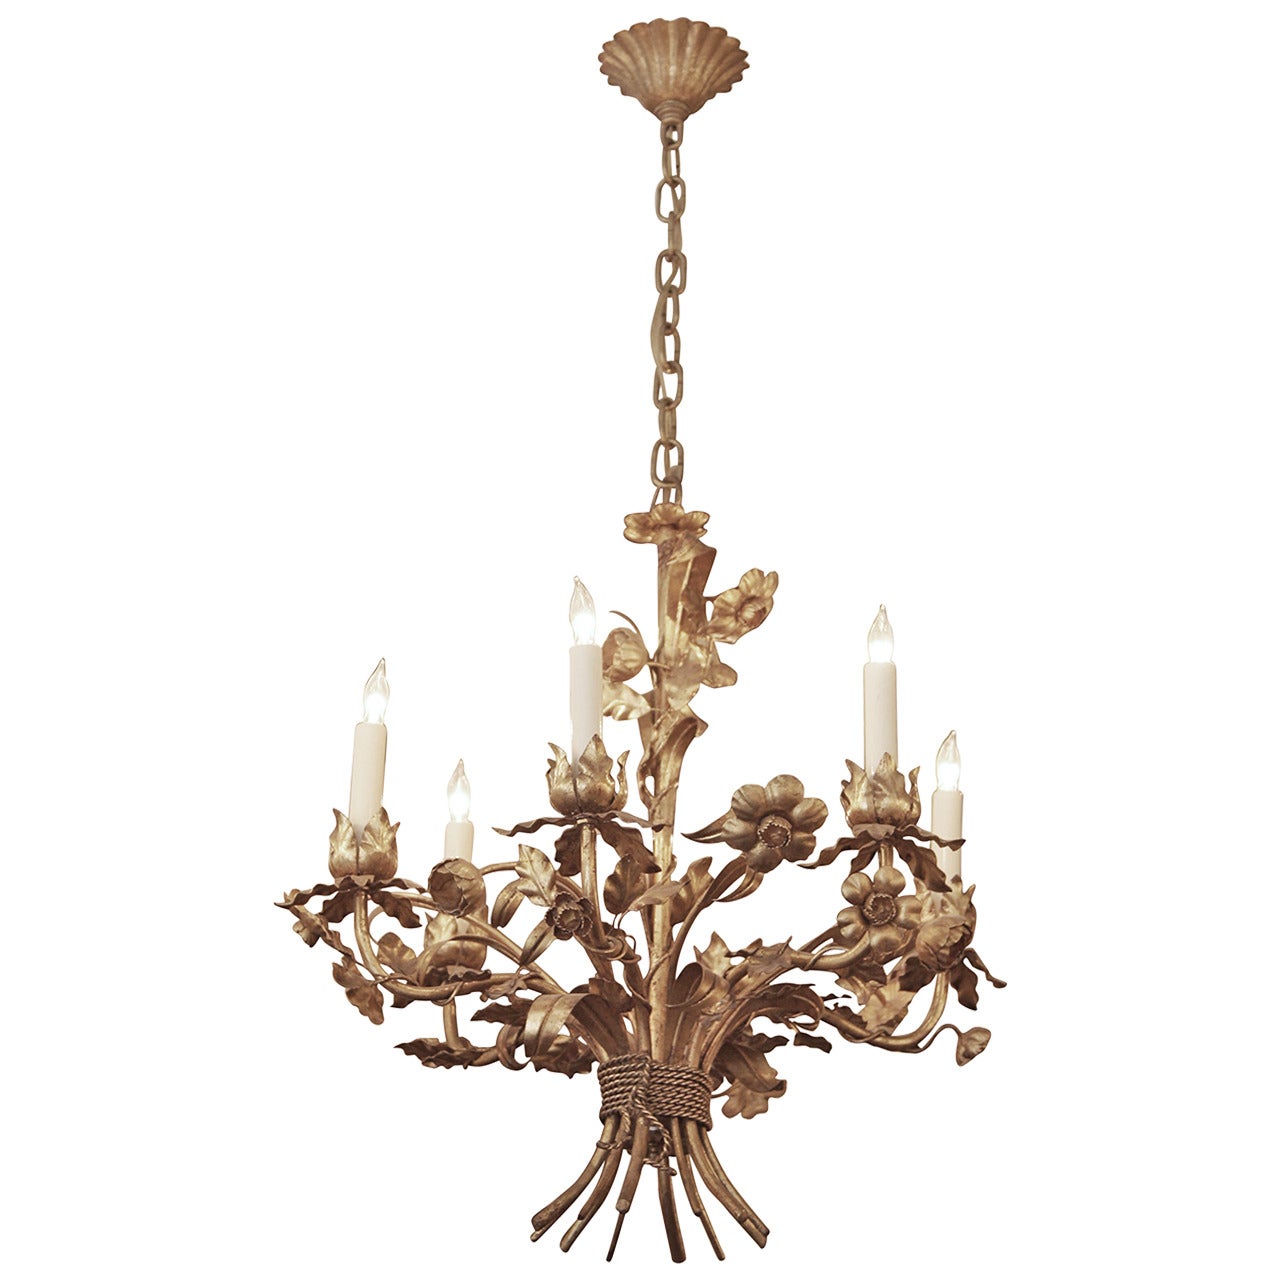 1950s Italian Gilt Metal Floral Six-Light Chandelier with Wheat and Ropes